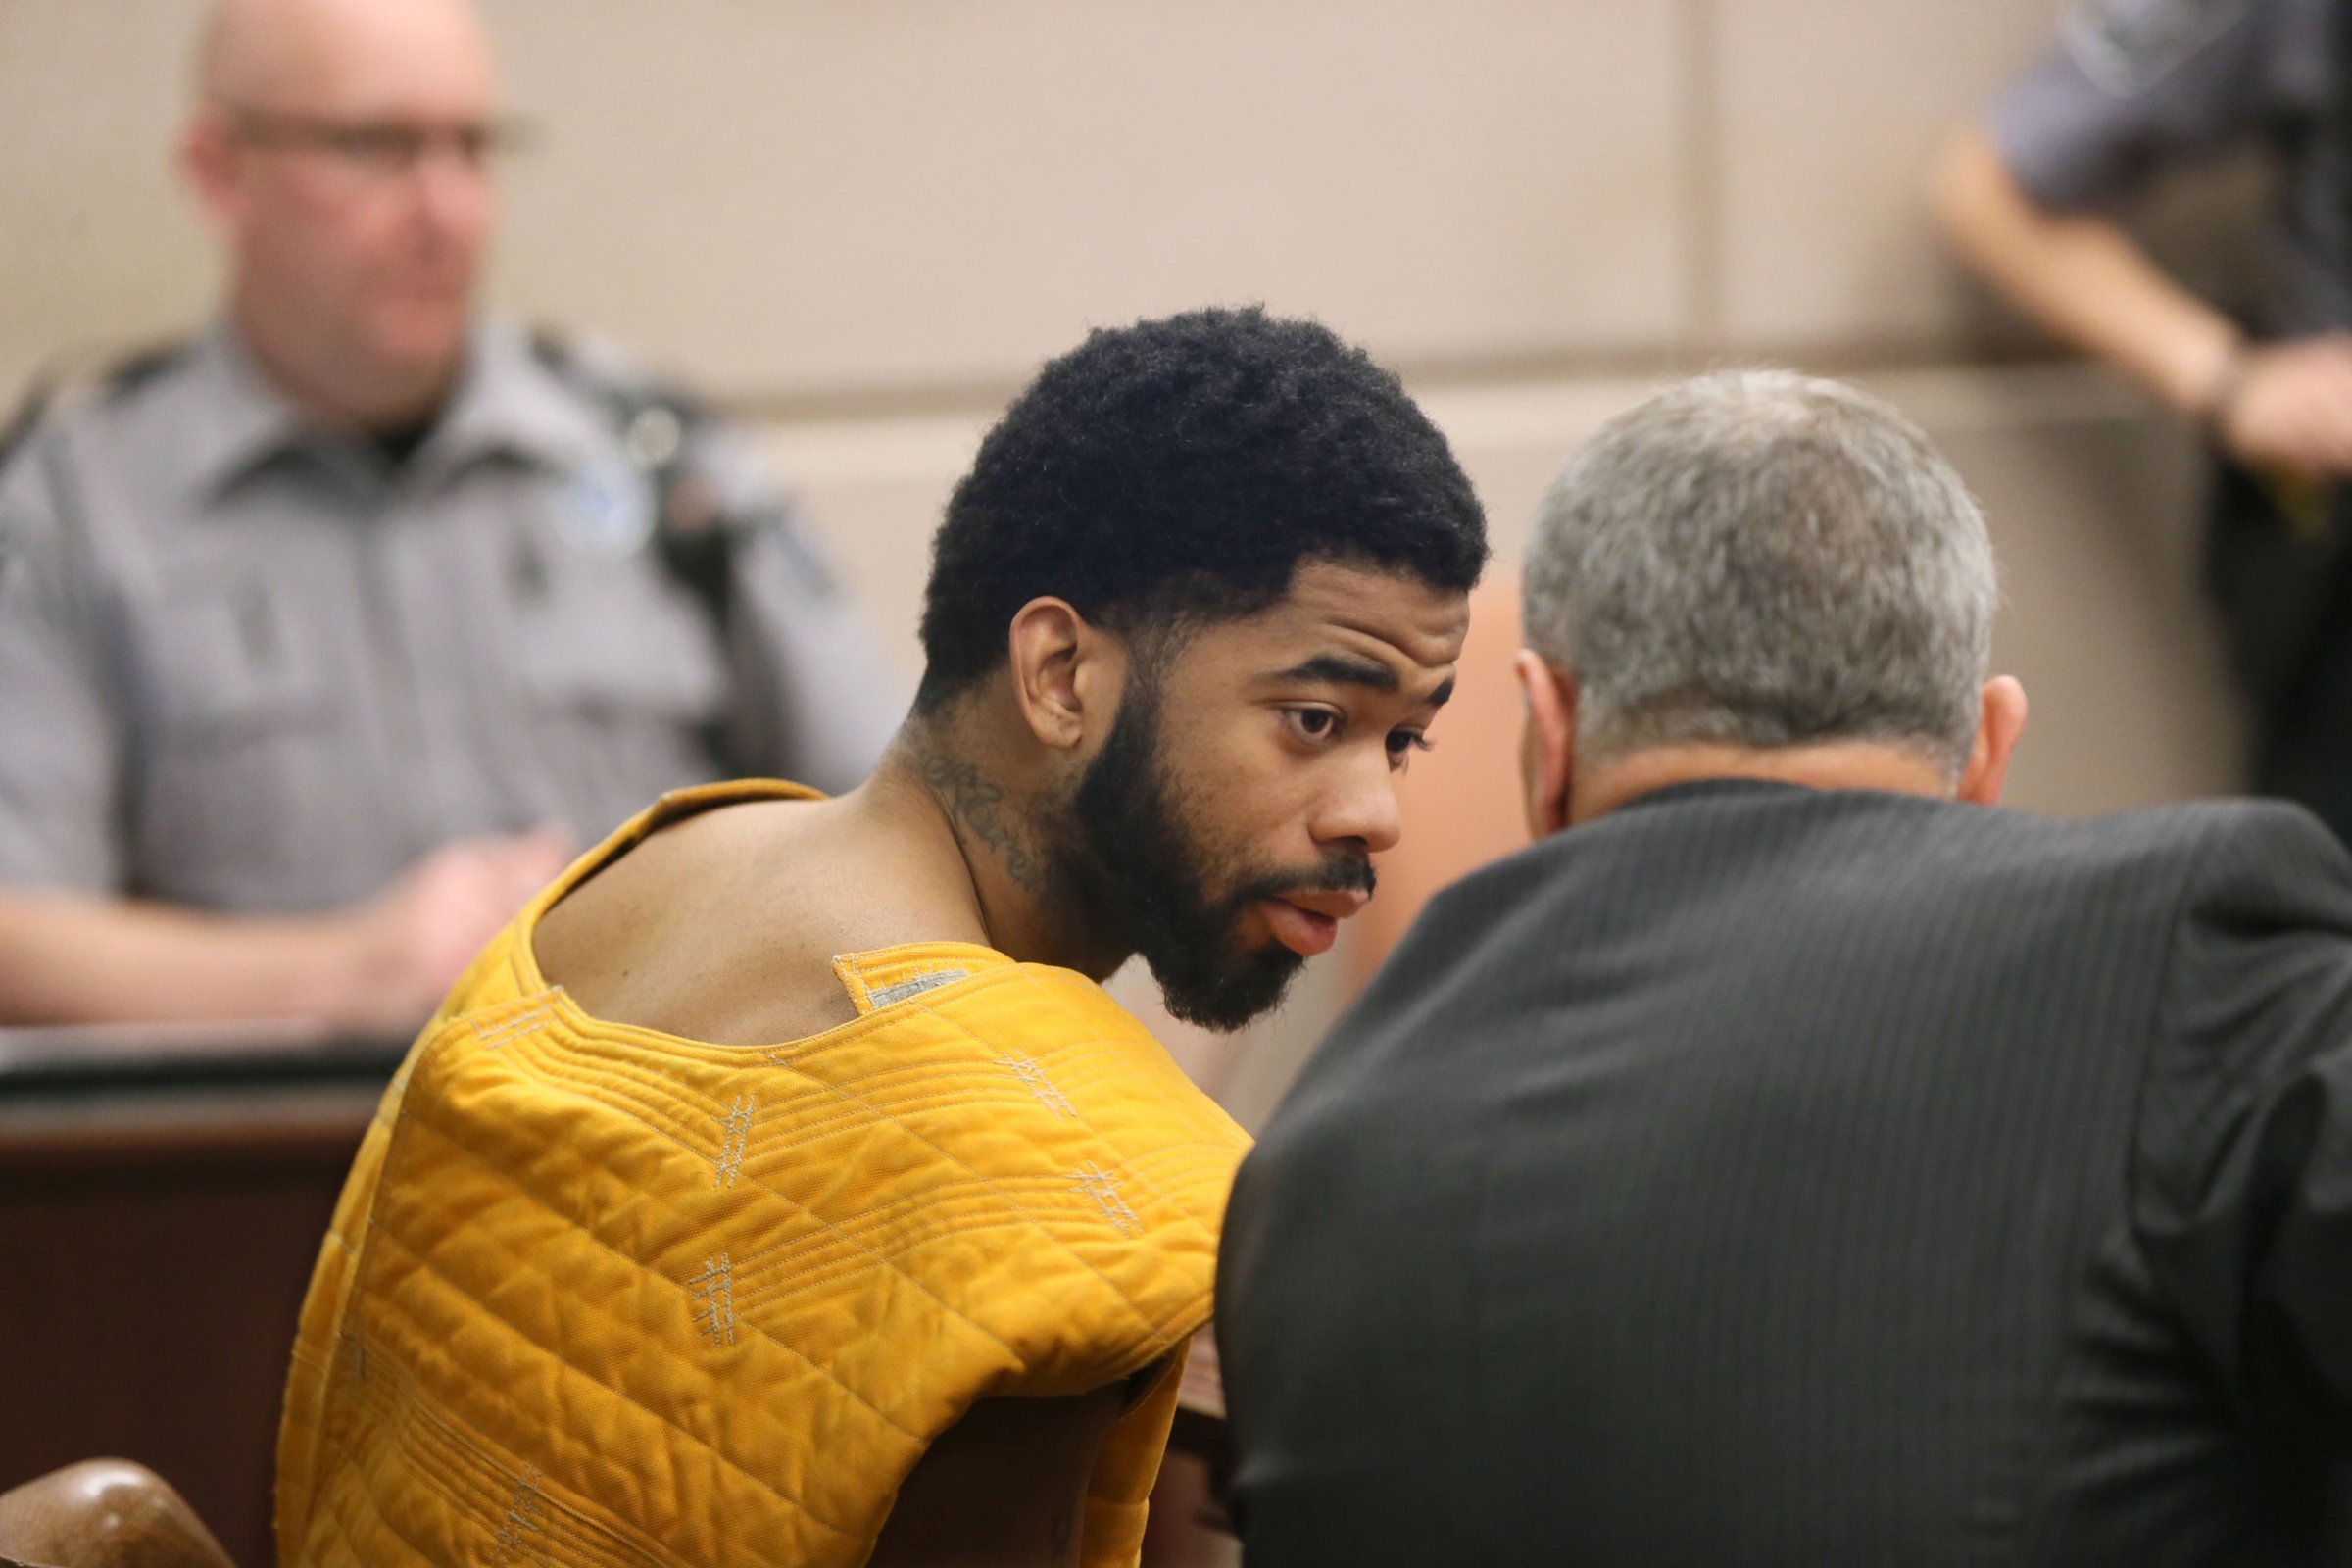 Dominique Heaggan-Brown appears in Milwaukee County Circuit Court, Wednesday, Oct. 26, 2016 in Milwaukee. Heaggan-Brown a Milwaukee police officer whose fatal shooting of a black man sparked a weekend of violent unrest in the city has been ordered to stand trial on unrelated sex assault charges. He is facing five charges that accuse him of sexually assaulting two men and soliciting sex from two others. He's jailed on $100,000 bond. (Michael Sears/Milwaukee Journal Sentinel via AP)